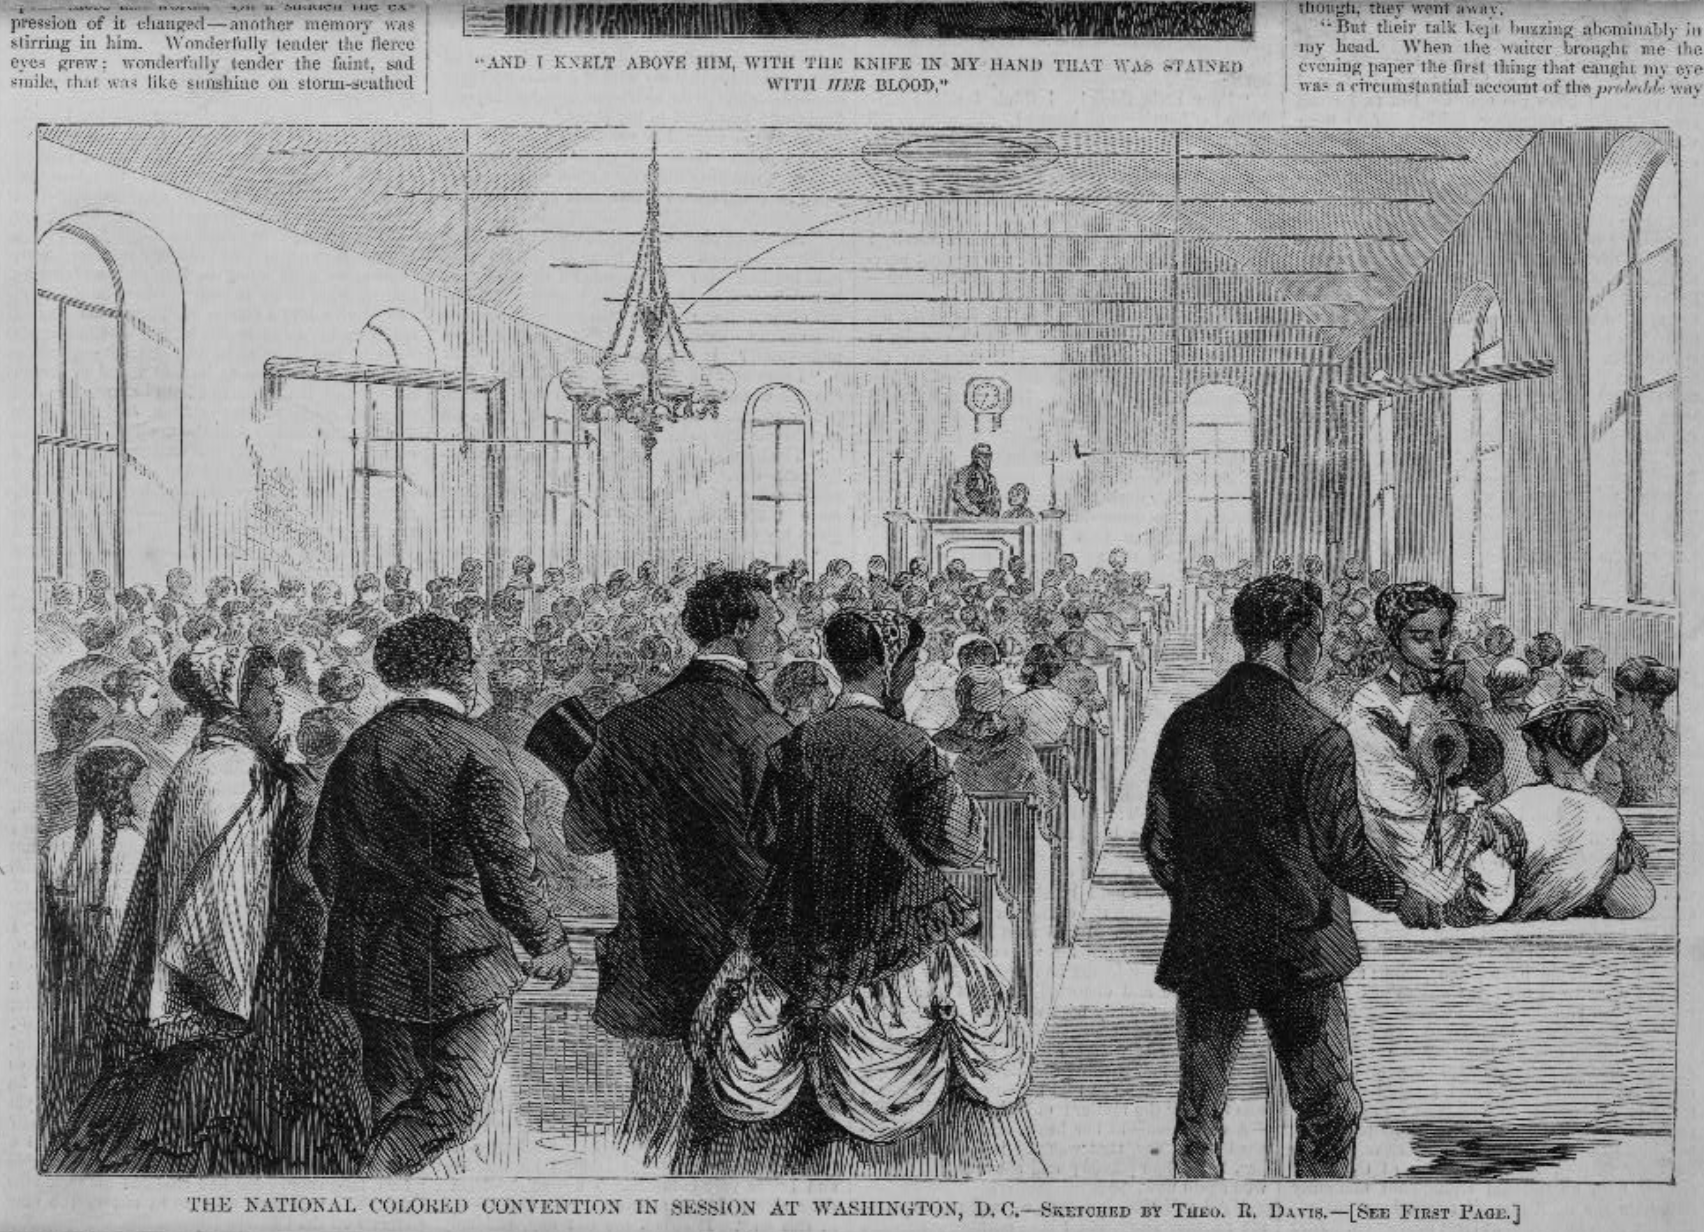 Black and white sketch. People standing in a large hall facing a man speaking at the podium. "The National Colored Convention in session at Washington, D.C." Sketched by Theo. R. Davis. Printed in Harper's Weekly, February 8, 1868.